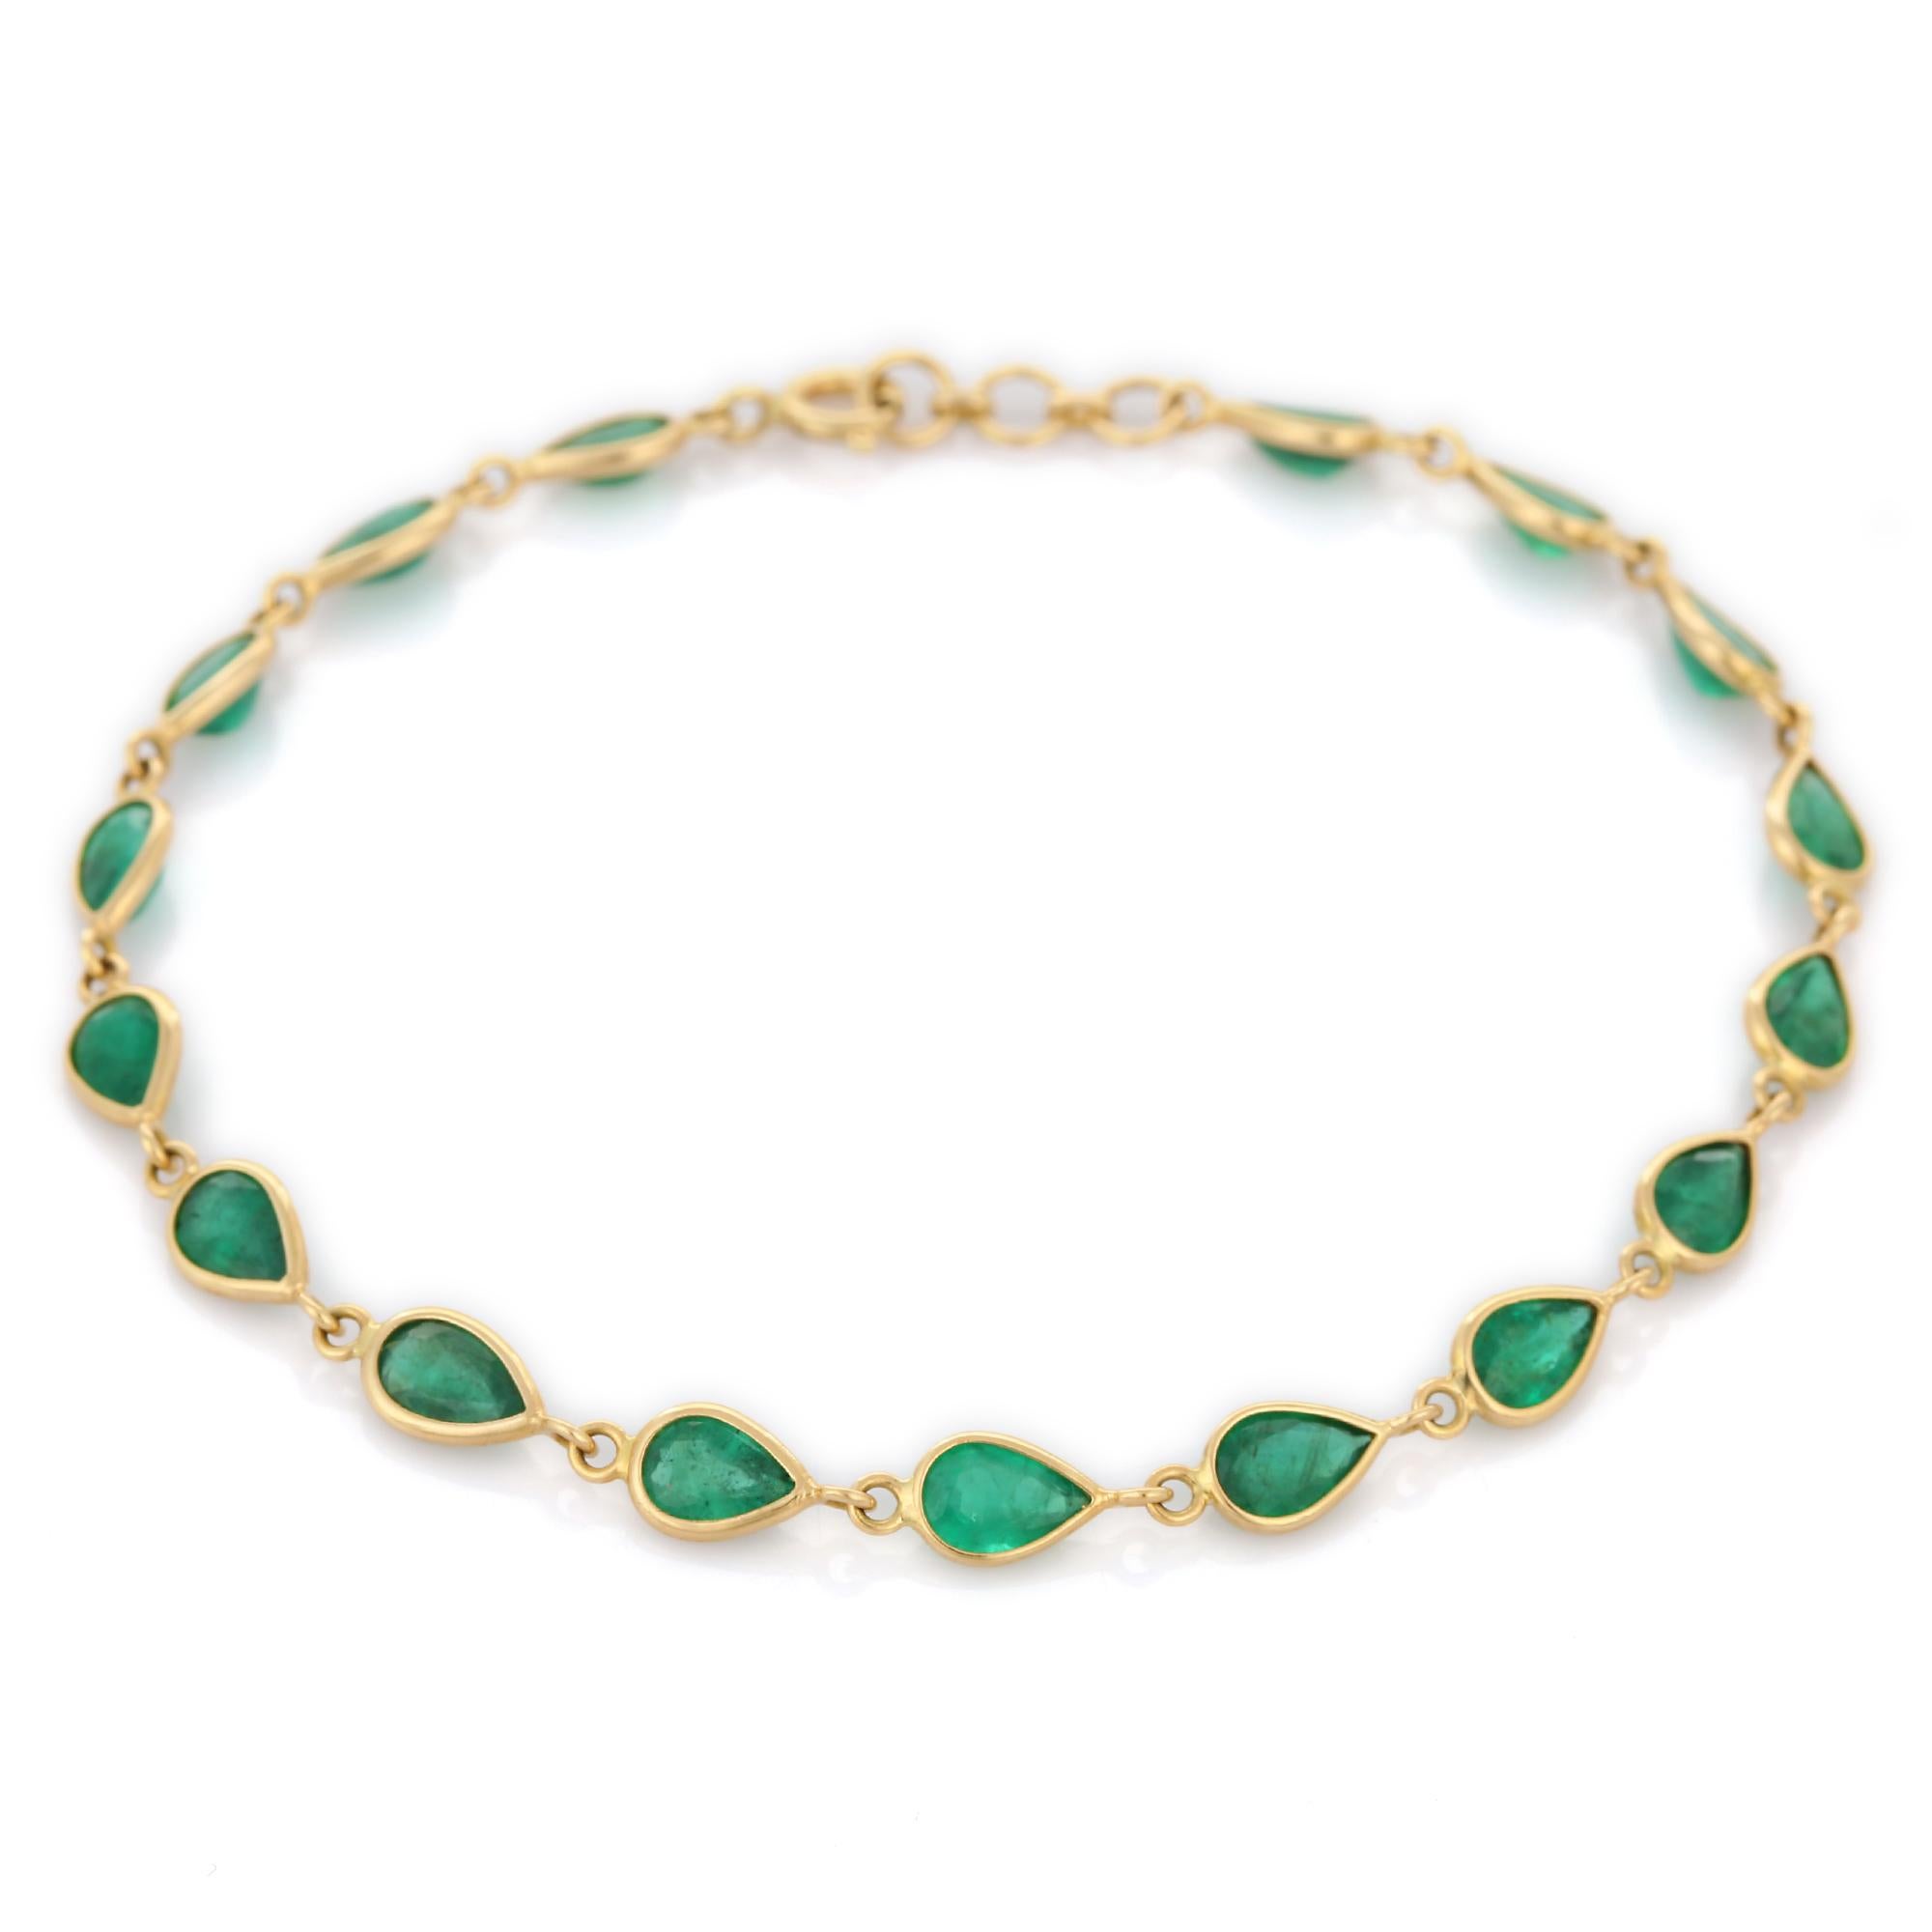 Exquisite 5.75 ct Pear Cut Emerald Chain Bracelet Inlaid in 18K Yellow Gold In New Condition For Sale In Houston, TX